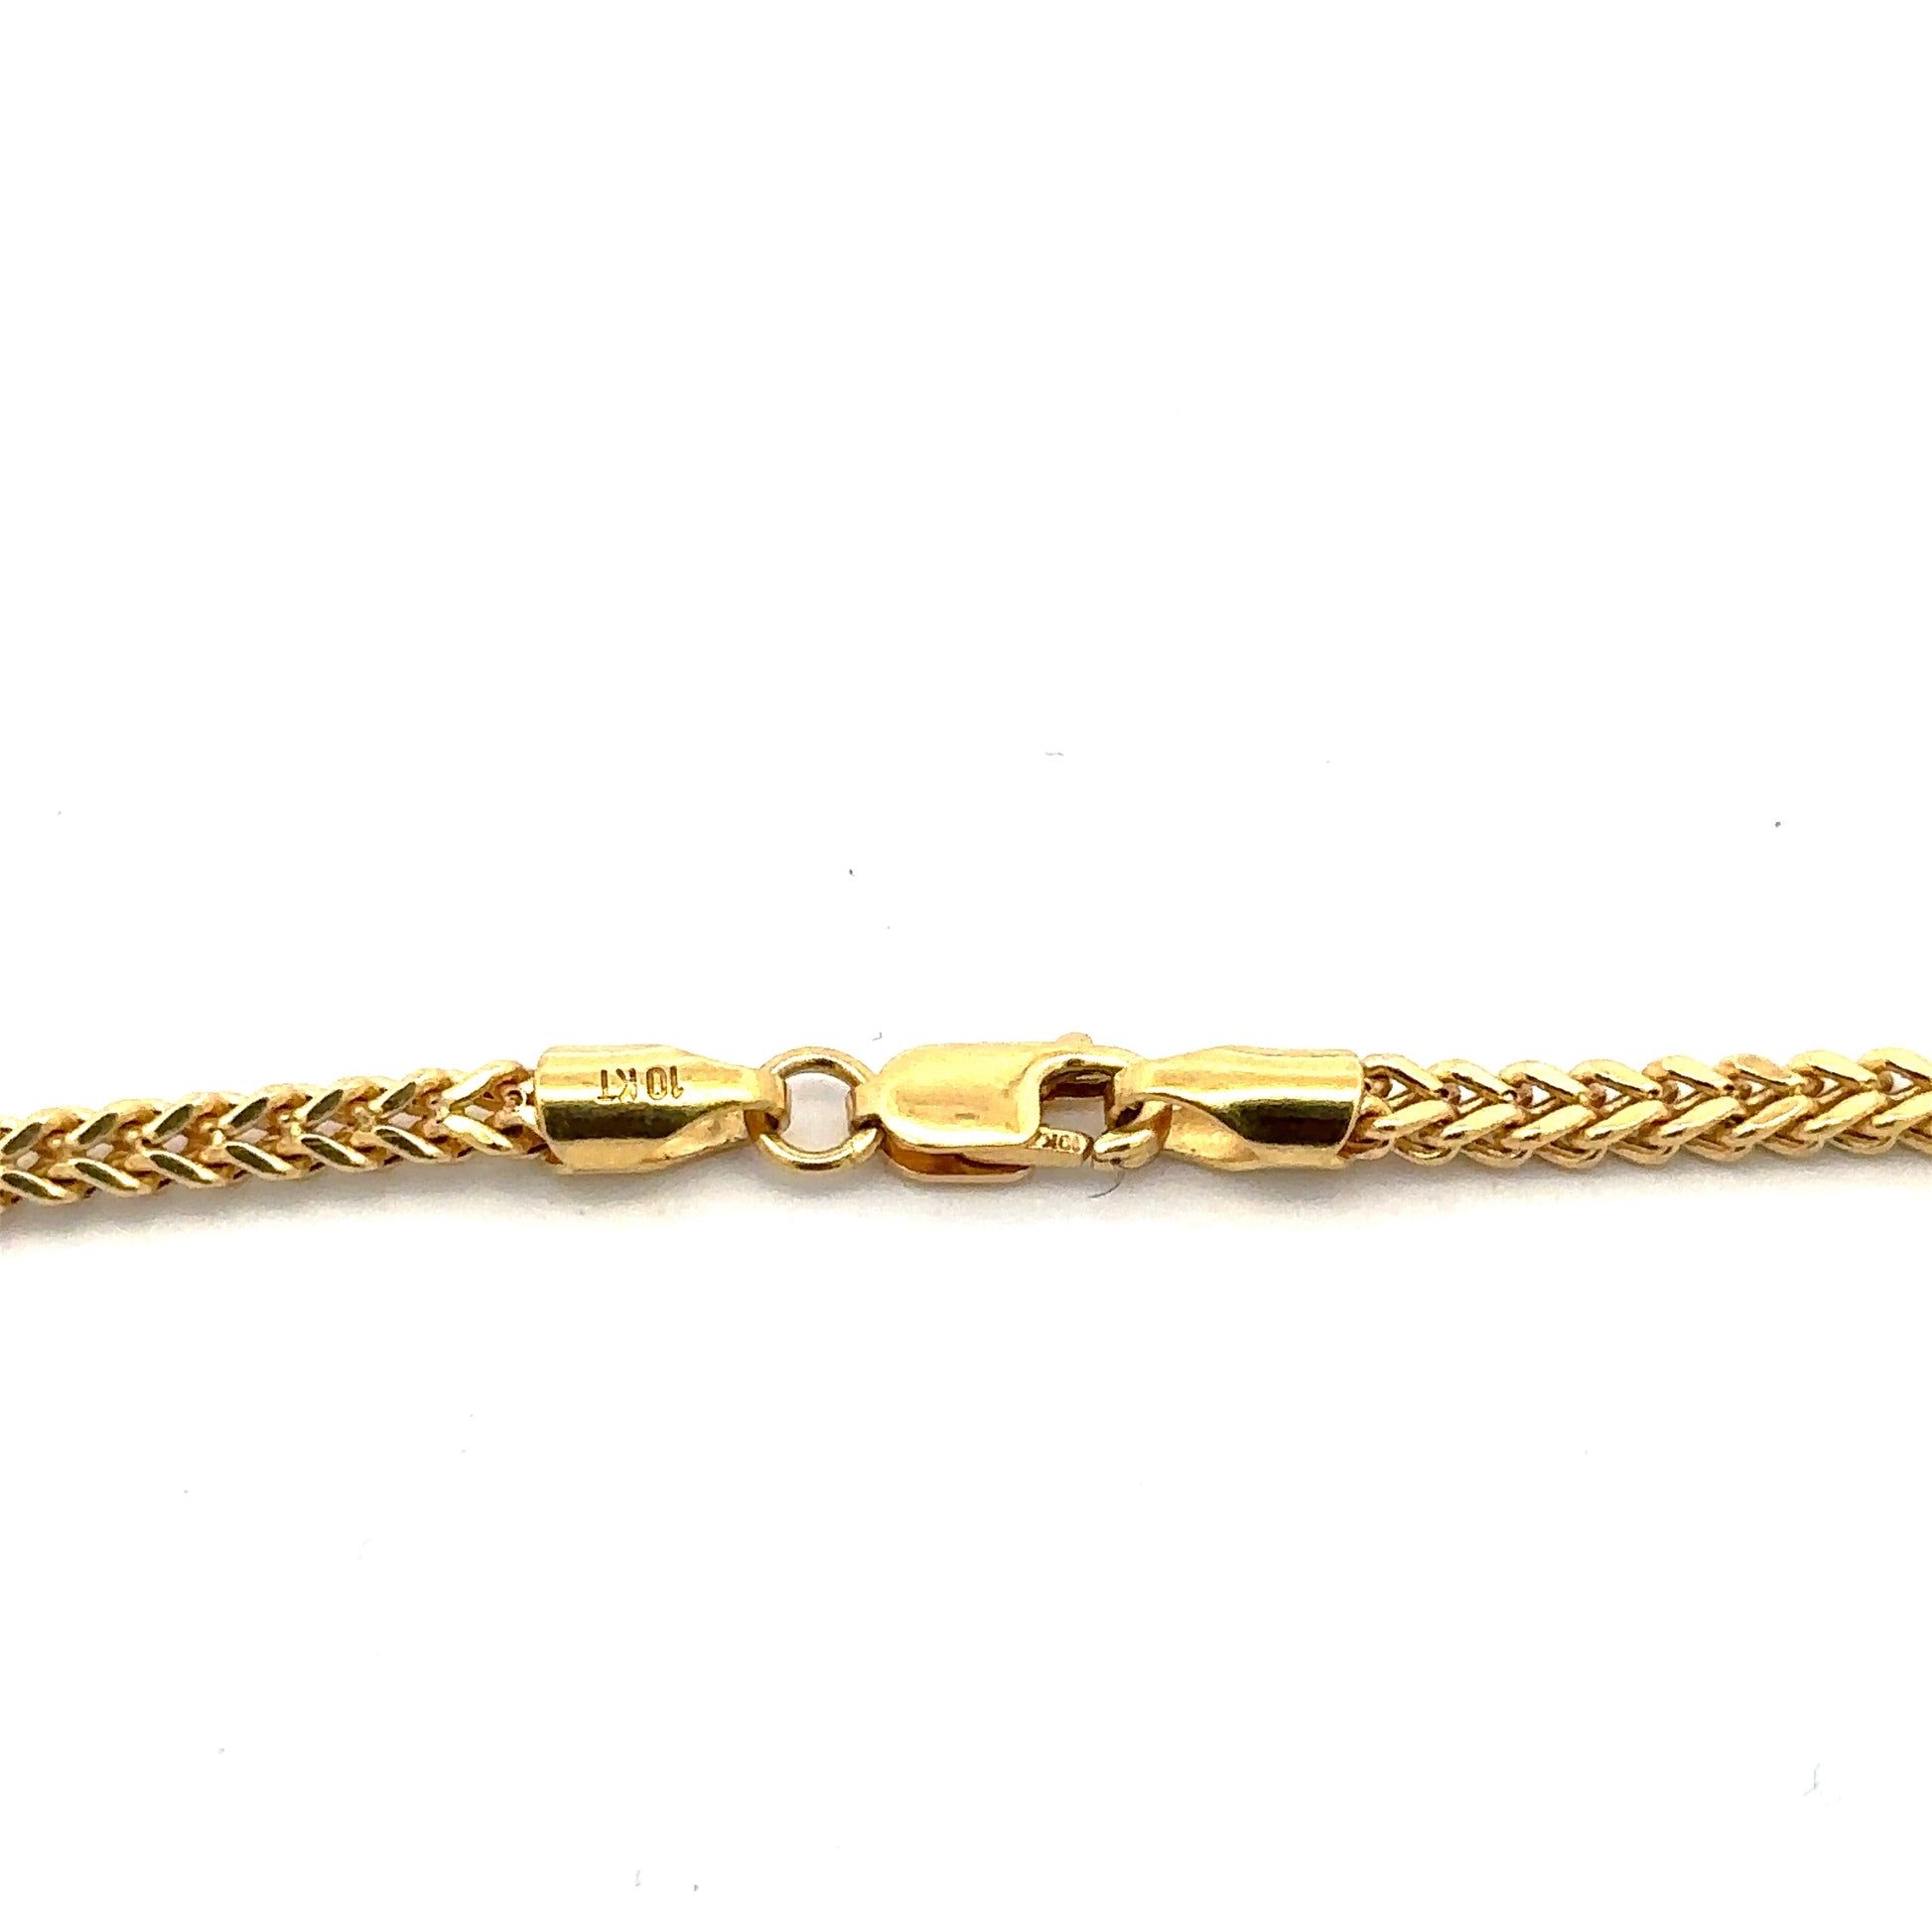 10k yellow gold lobster clasp